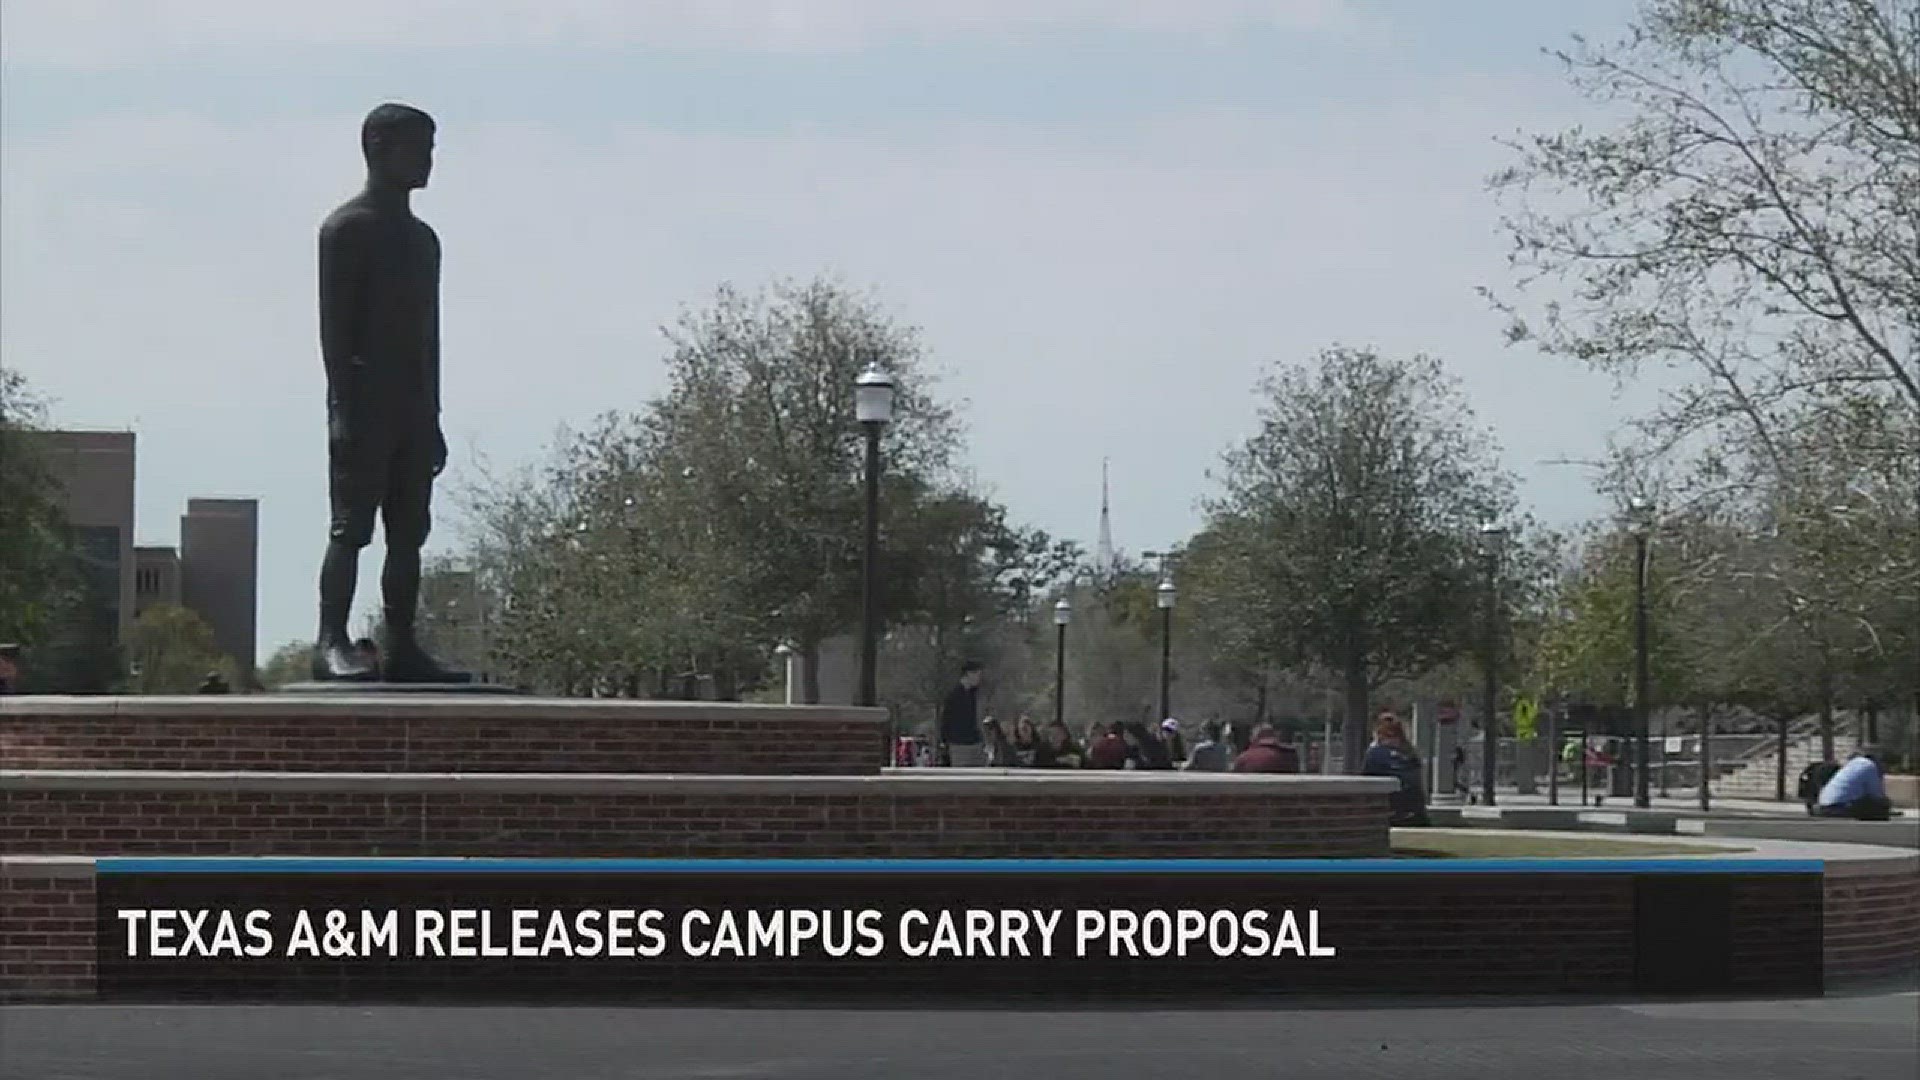 Students are reacting to Texas A&M University's campus carry proposal.